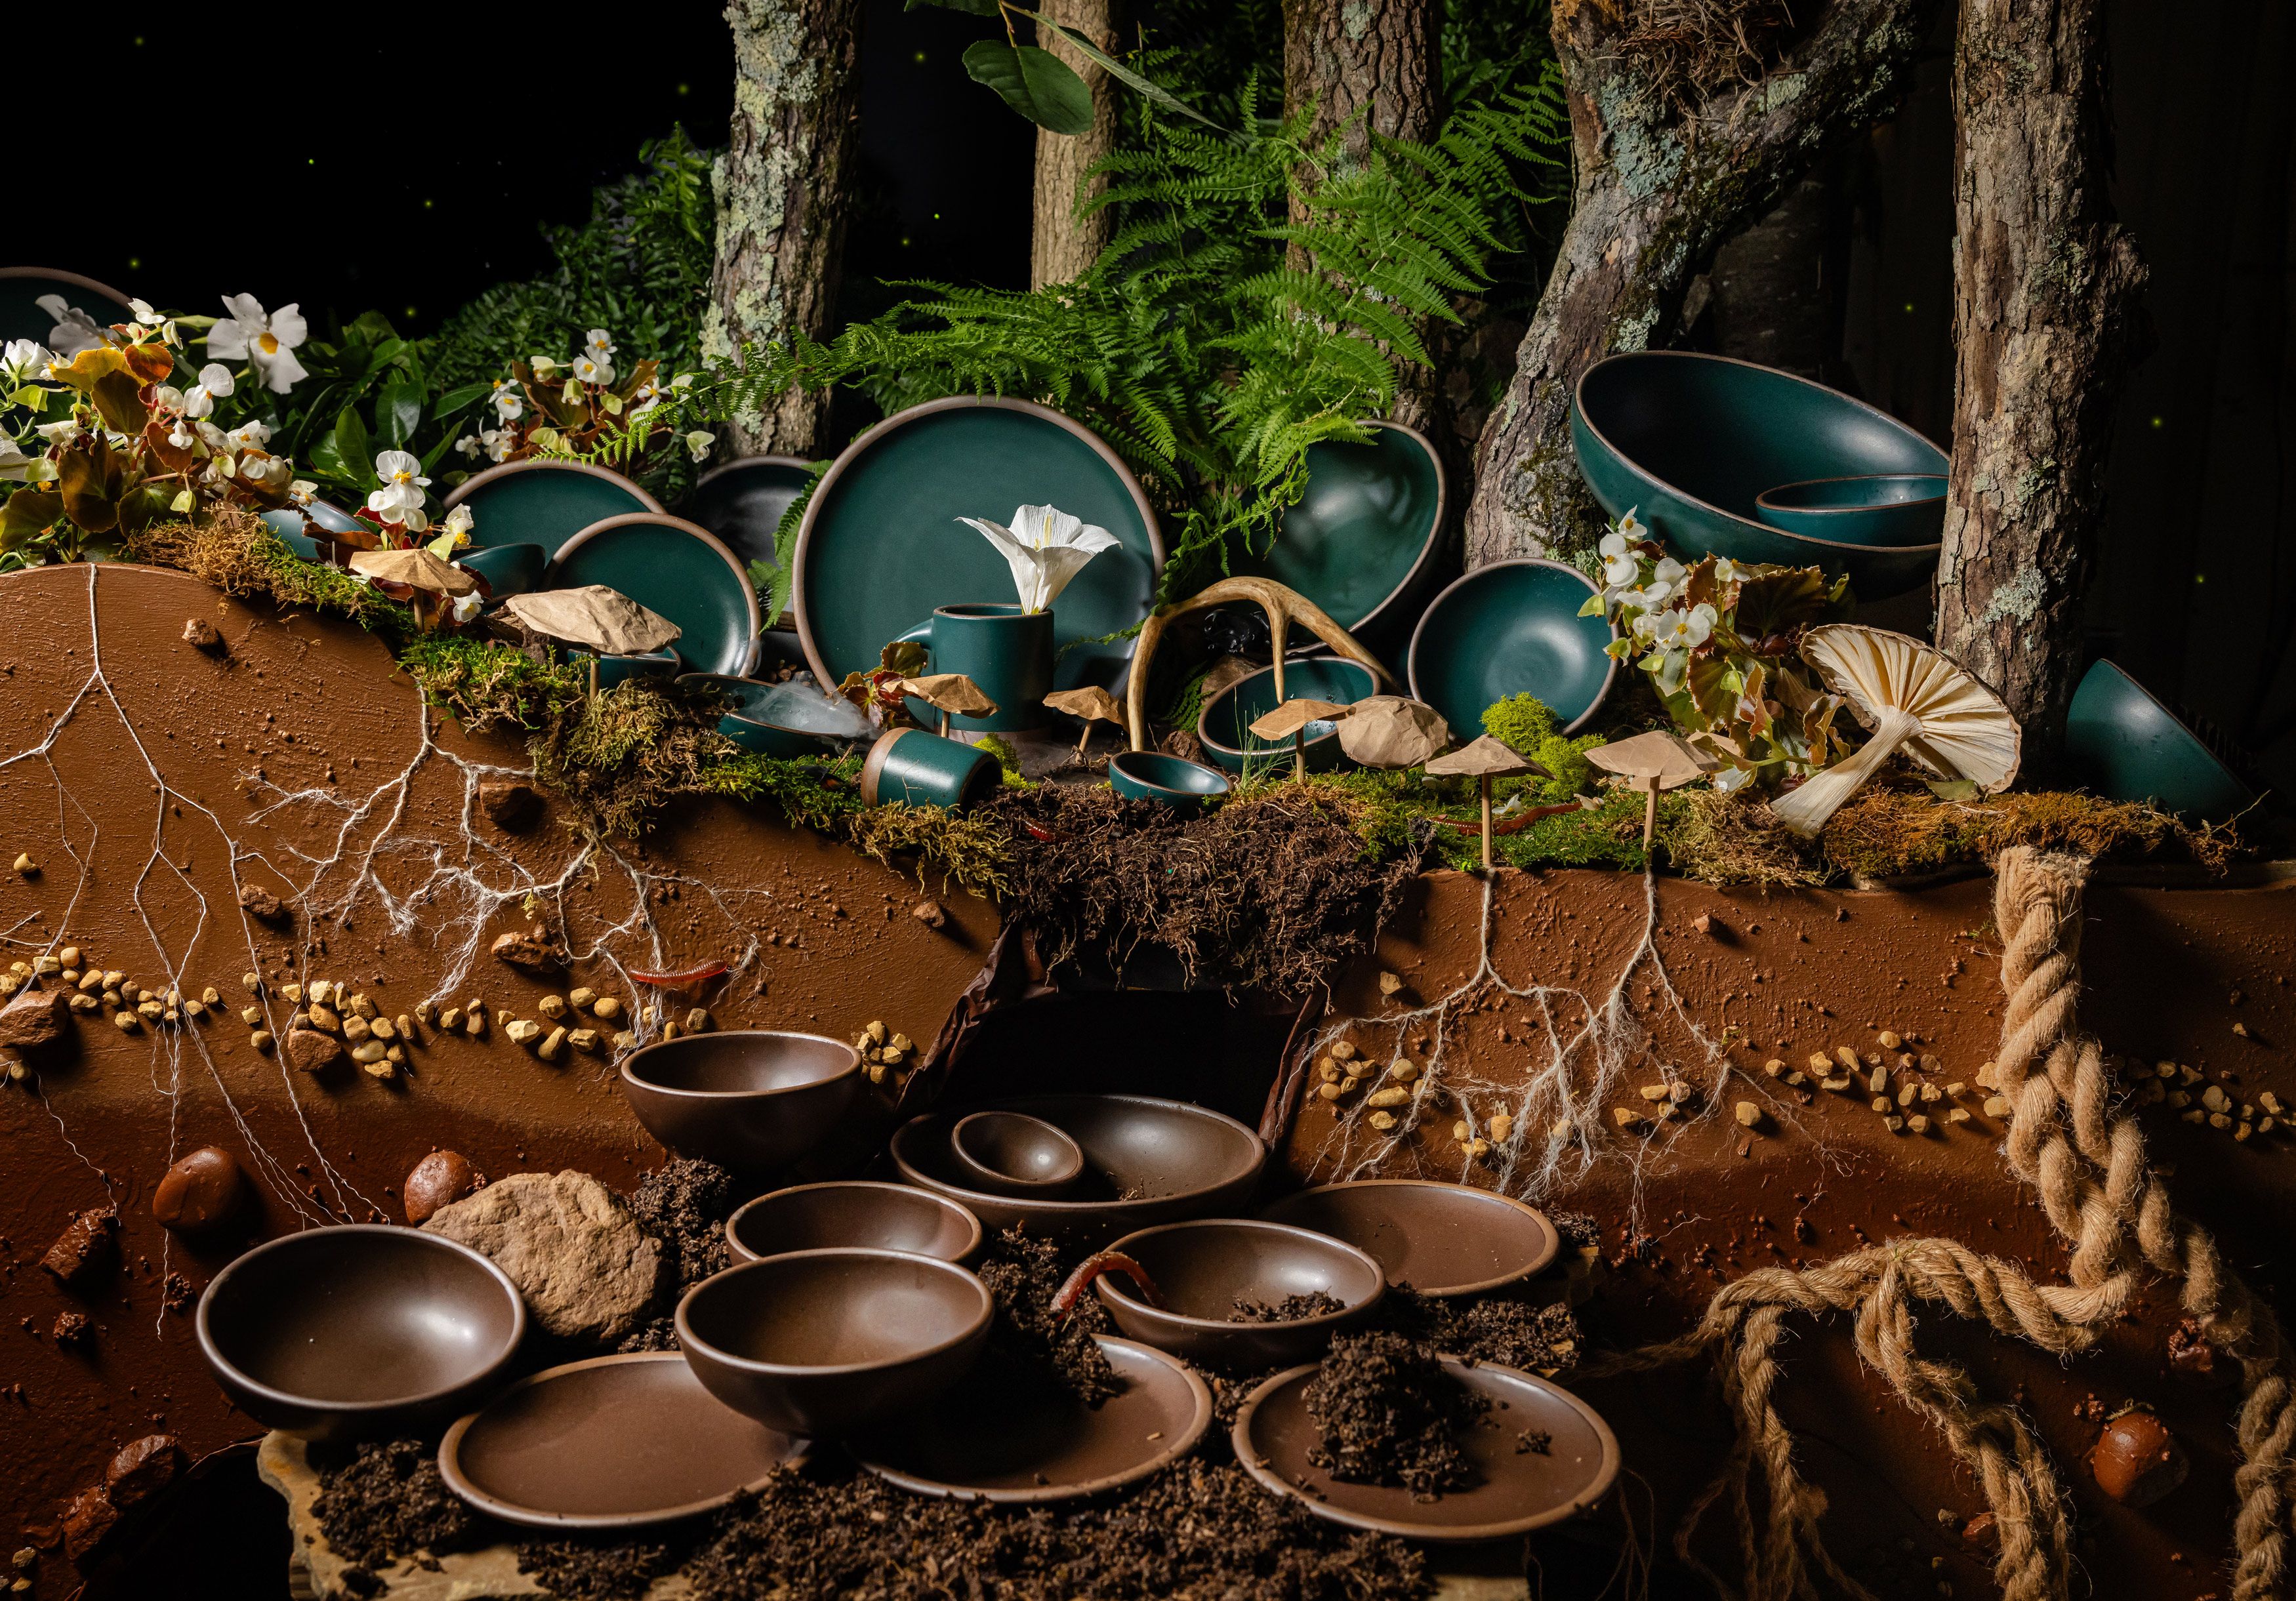 A dark forest set environment that shows off above and below the earth. Above the earth is tree bark, ferns, moss and various ceramic plates and bowls in a deep dark teal. Below earth is roots, rocks, and dirt with various plates and bowls in a dark brown. 